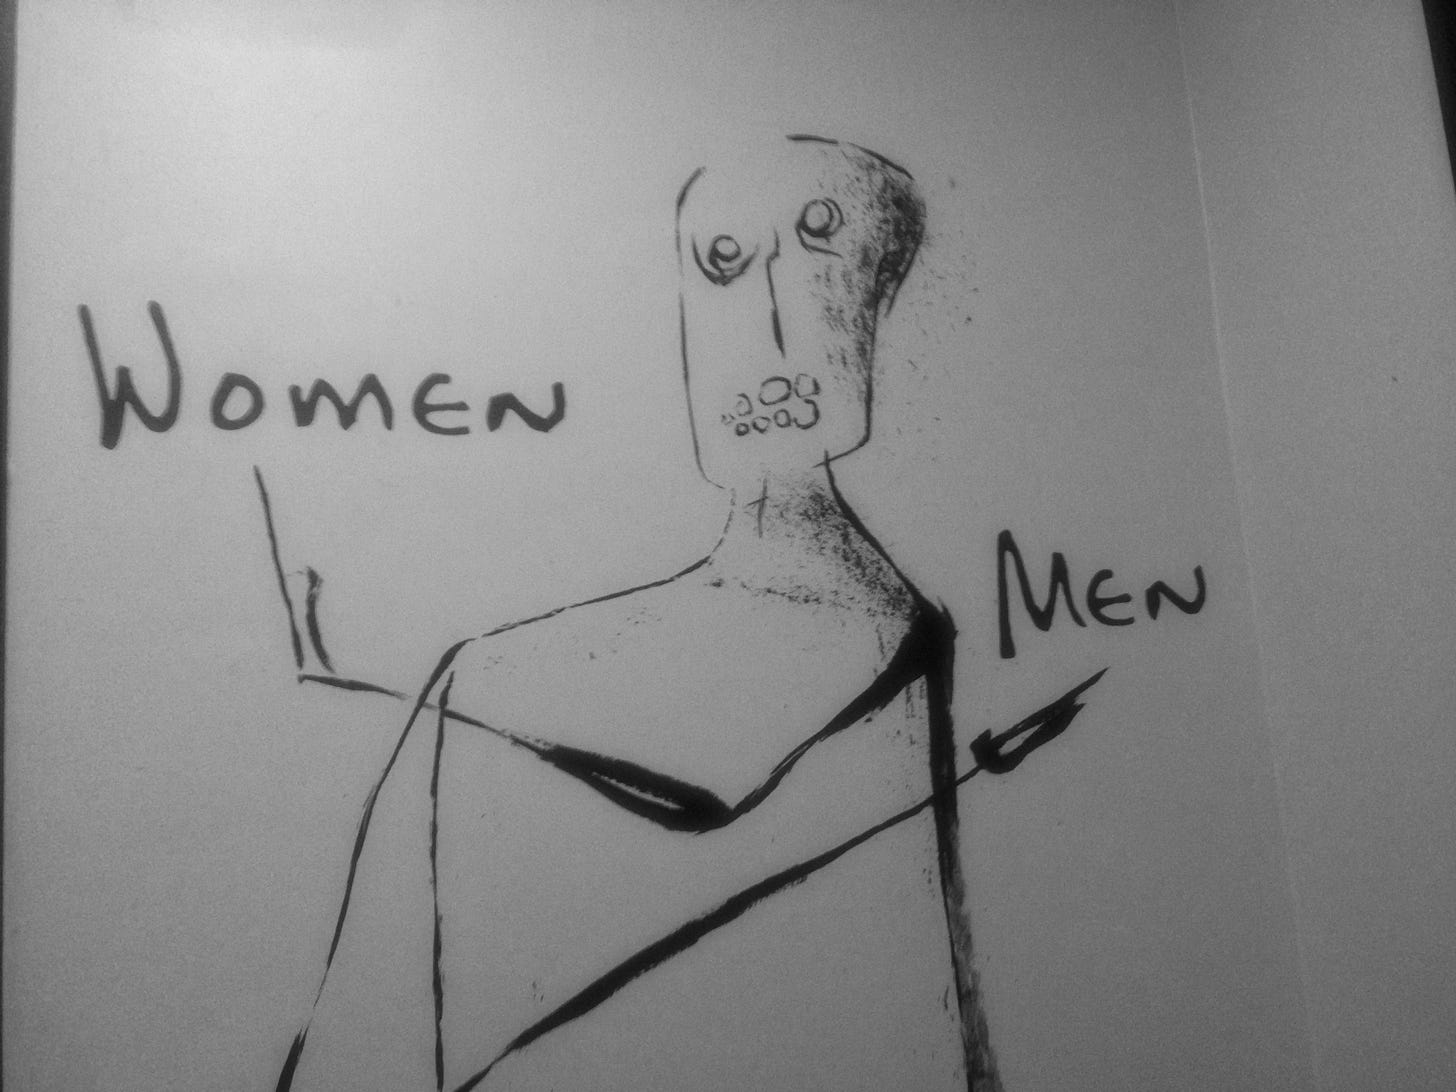 Line drawing of a creepy sort of figure separating "women" and "men" 